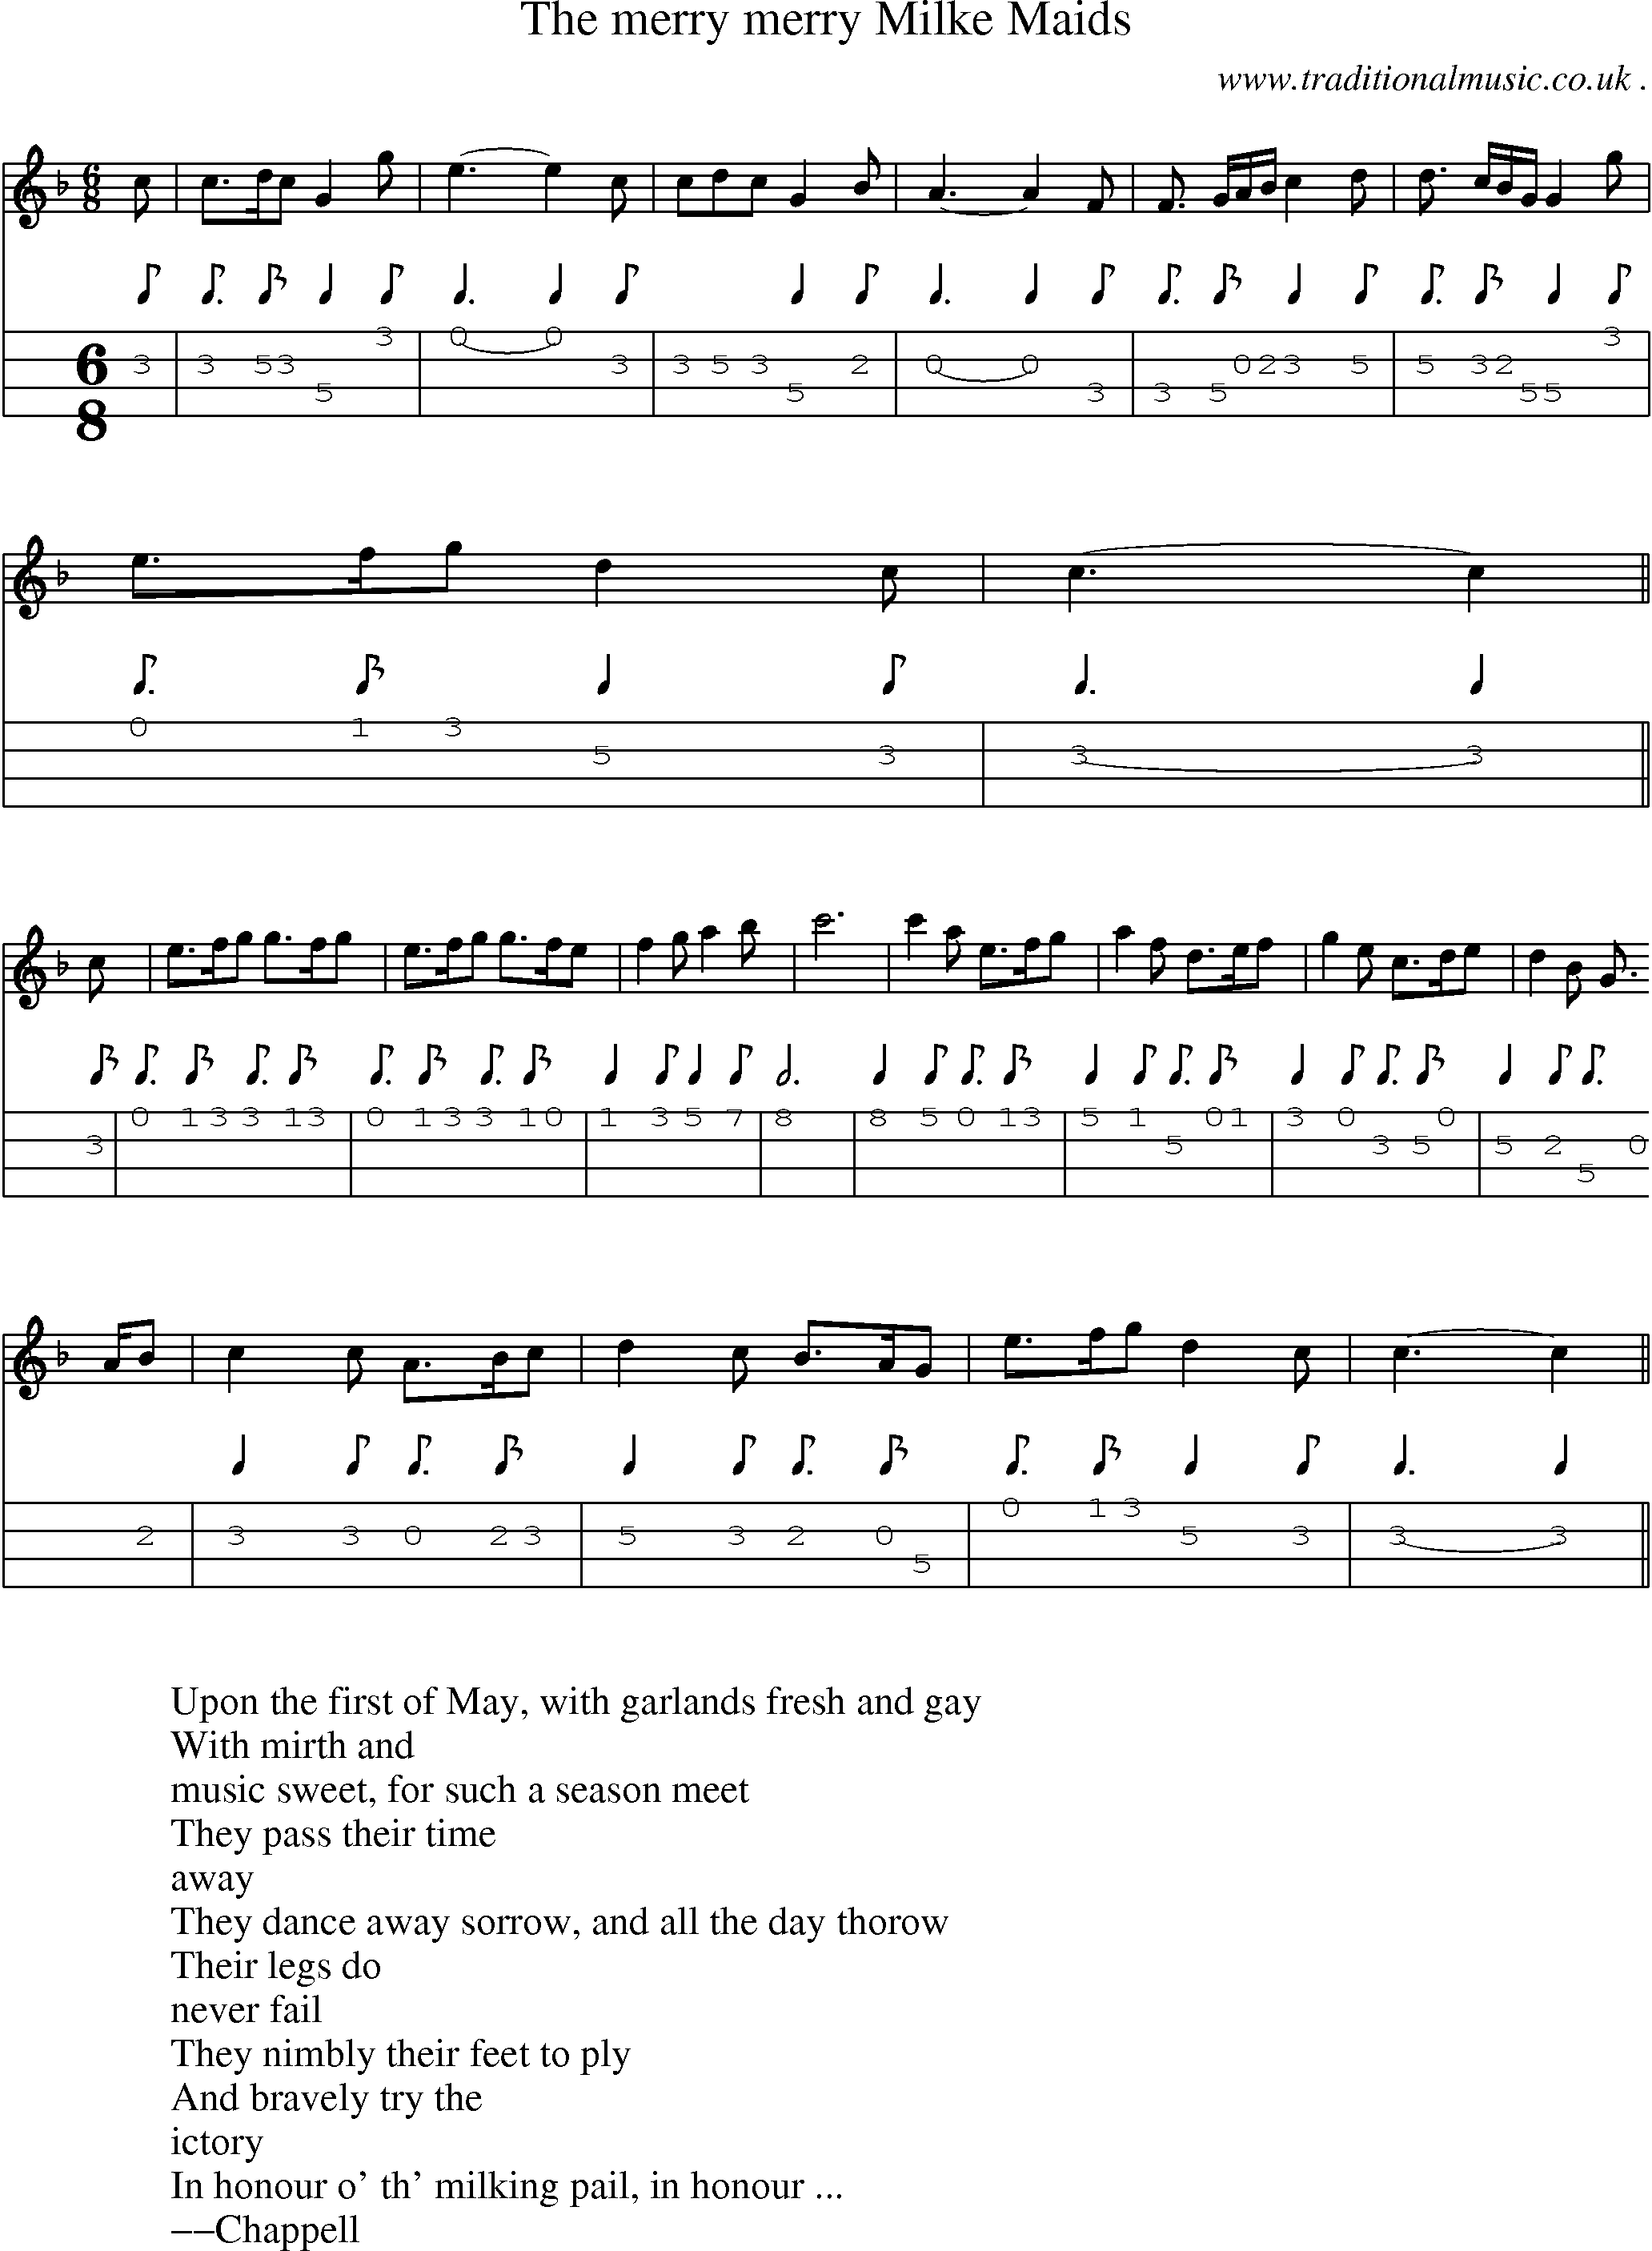 Sheet-Music and Mandolin Tabs for The Merry Merry Milke Maids